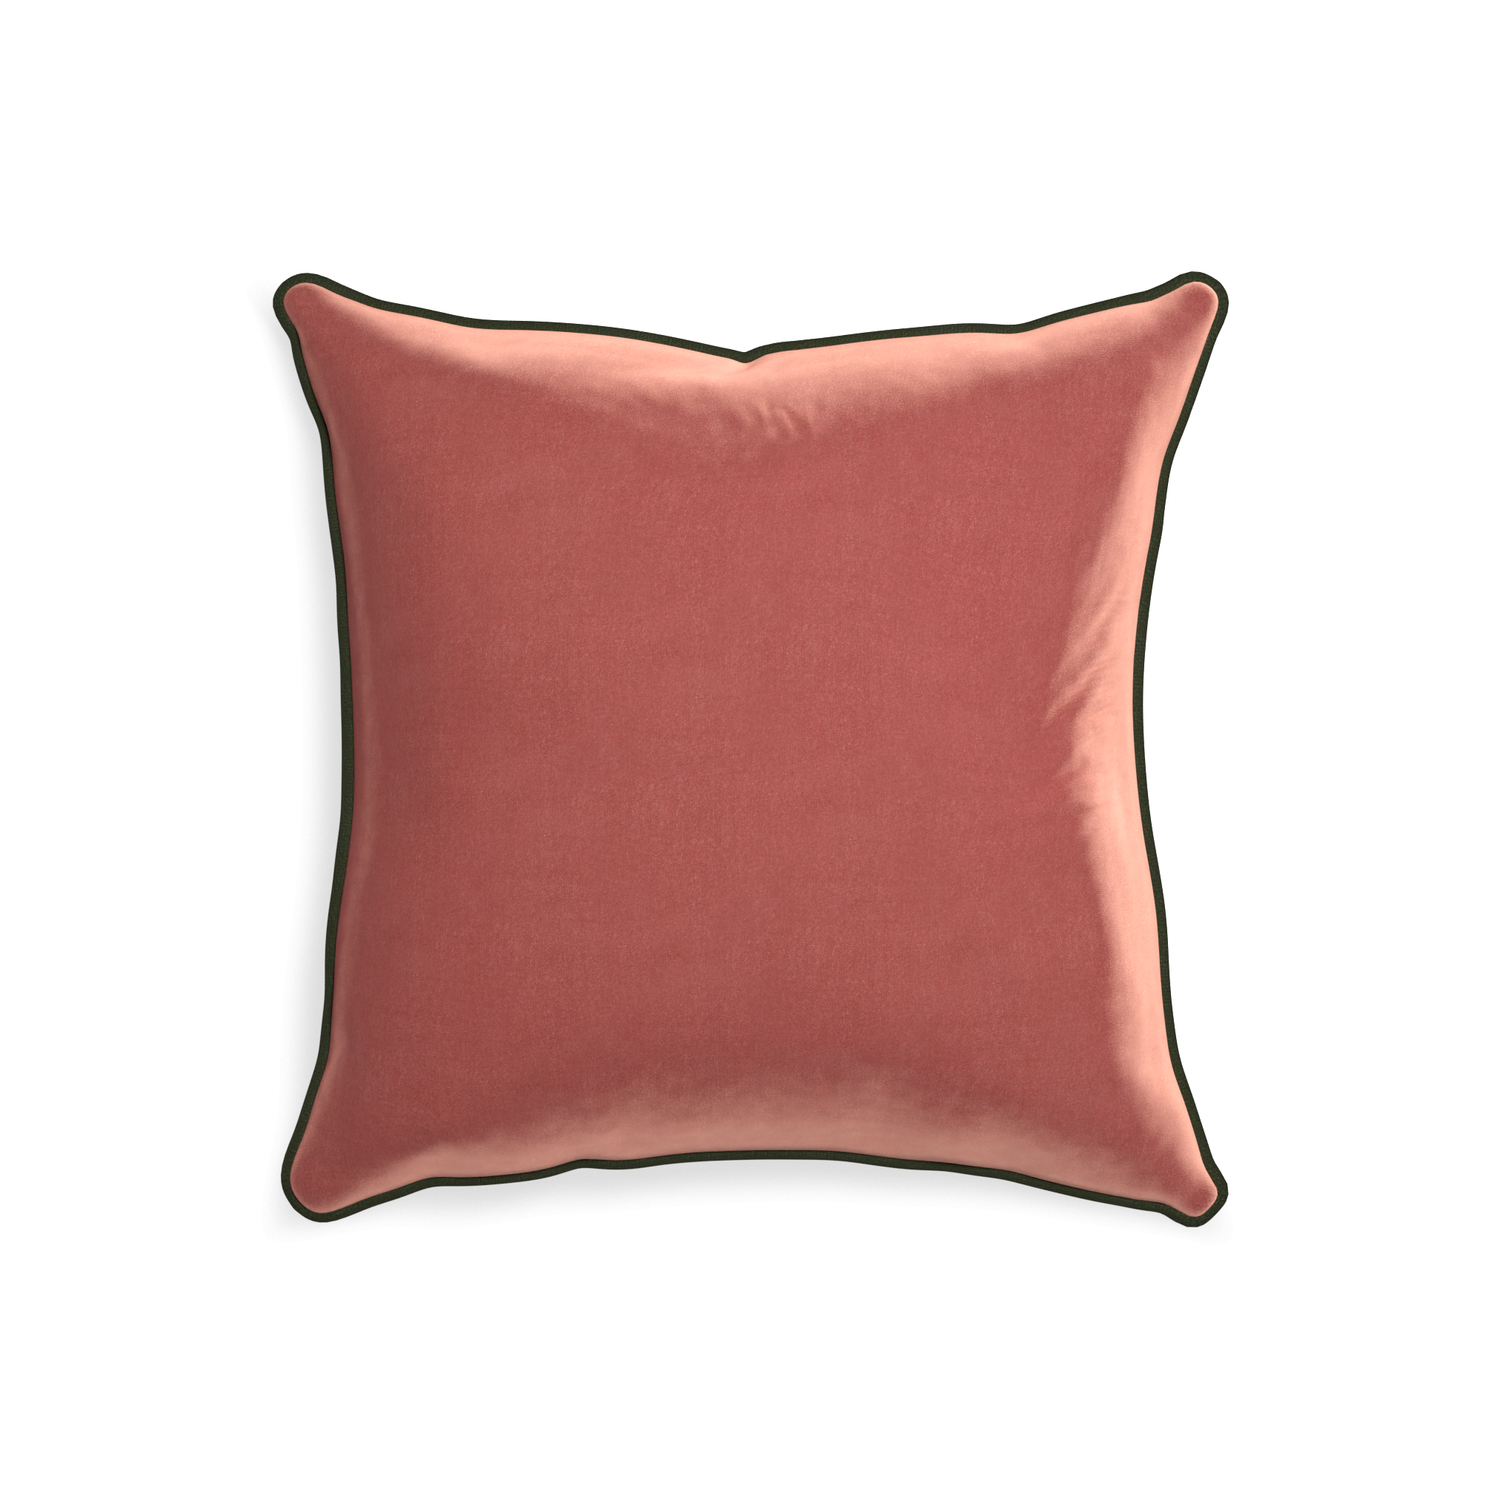 20-square cosmo velvet custom pillow with f piping on white background